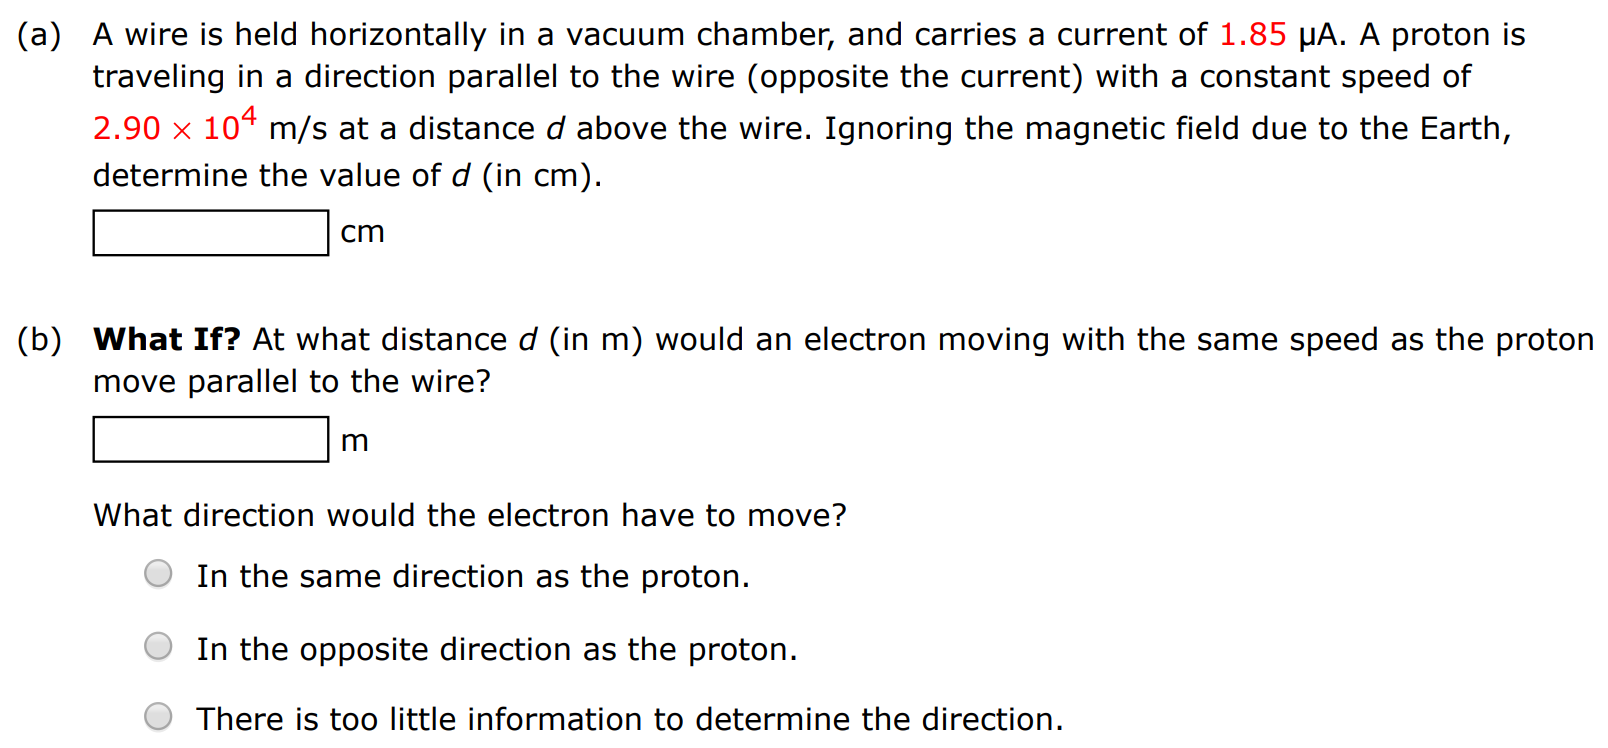 (a) A wire is held horizontally in a vacuum chamber, and carries a current of 1.85 μA. A proton is traveling in a direction parallel to the wire (opposite the current) with a constant speed of 2.90×104 m/s at a distance d above the wire. Ignoring the magnetic field due to the Earth, determine the value of d (in cm). cm (b) What If? At what distance d (in m) would an electron moving with the same speed as the proton move parallel to the wire? m What direction would the electron have to move? In the same direction as the proton. In the opposite direction as the proton. There is too little information to determine the direction.